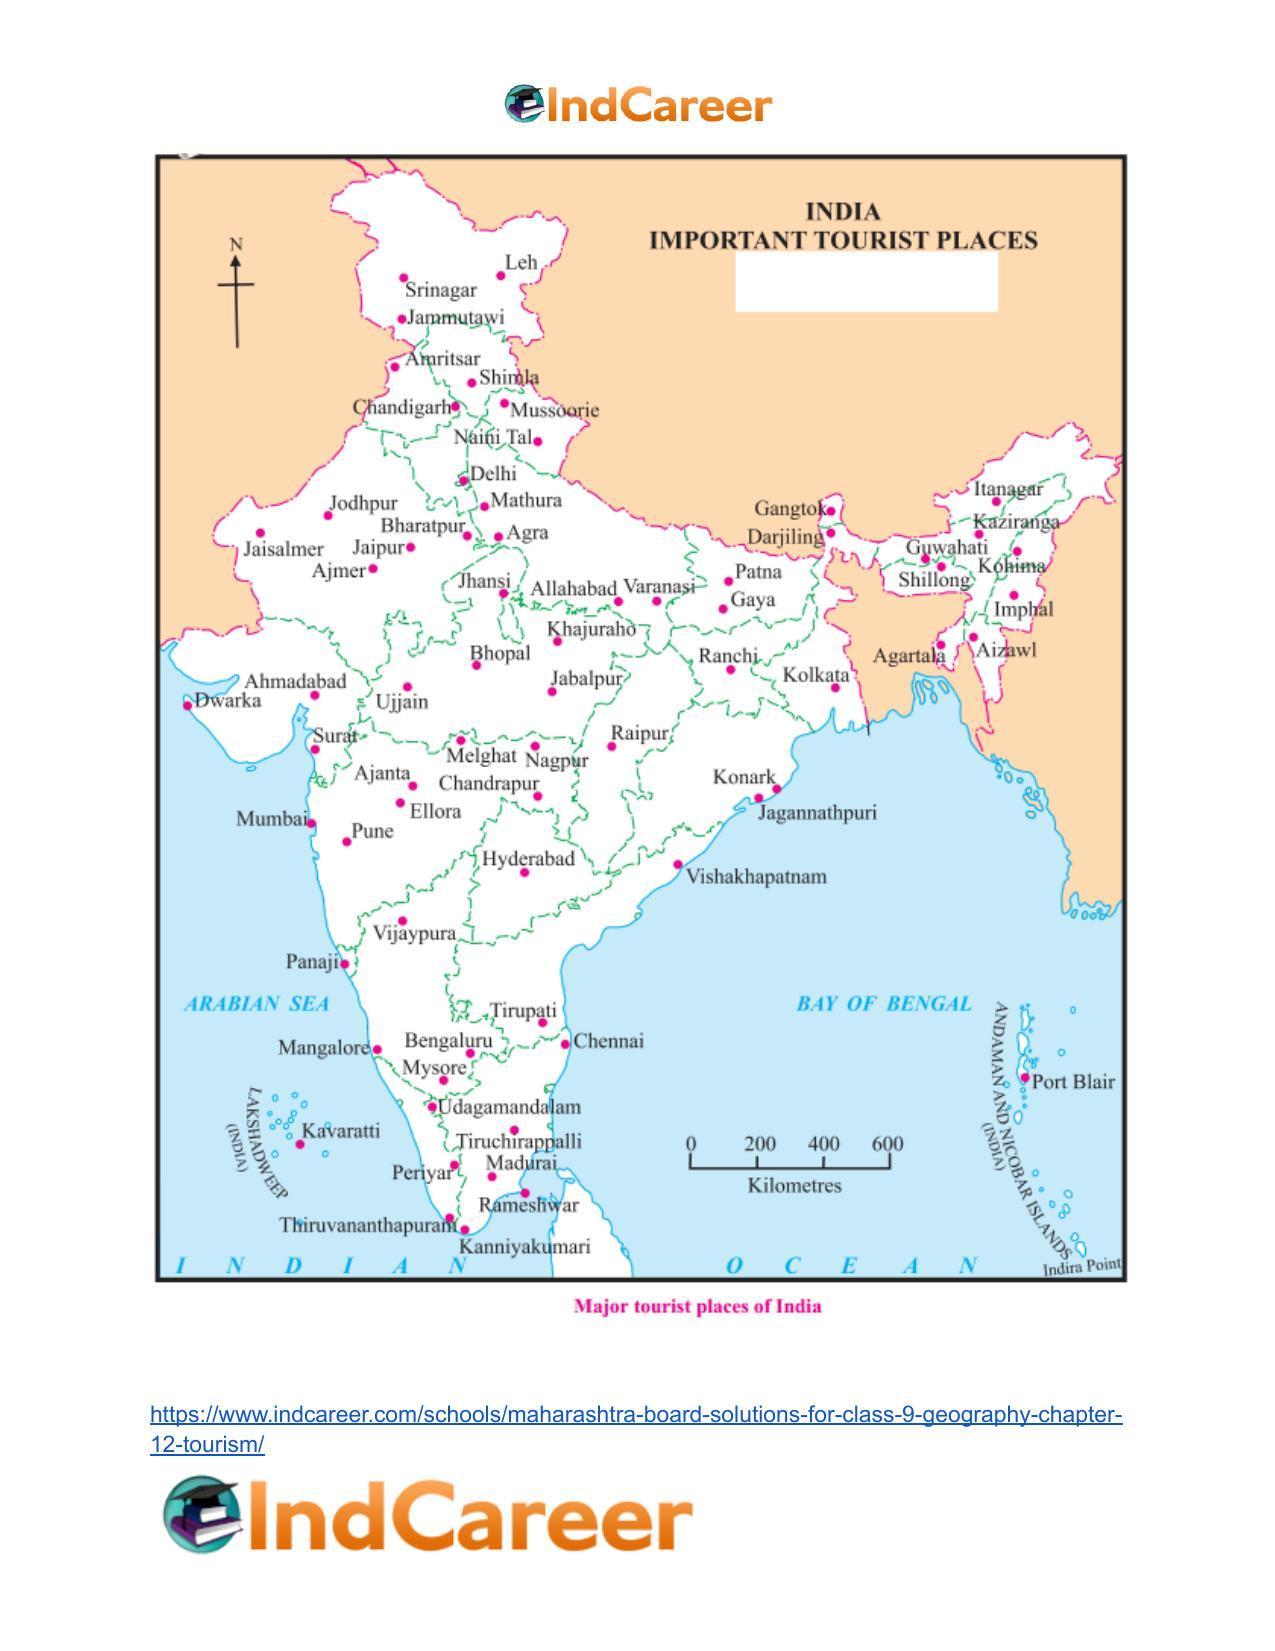 Maharashtra Board Solutions for Class 9- Geography: Chapter 12- Tourism - Page 25